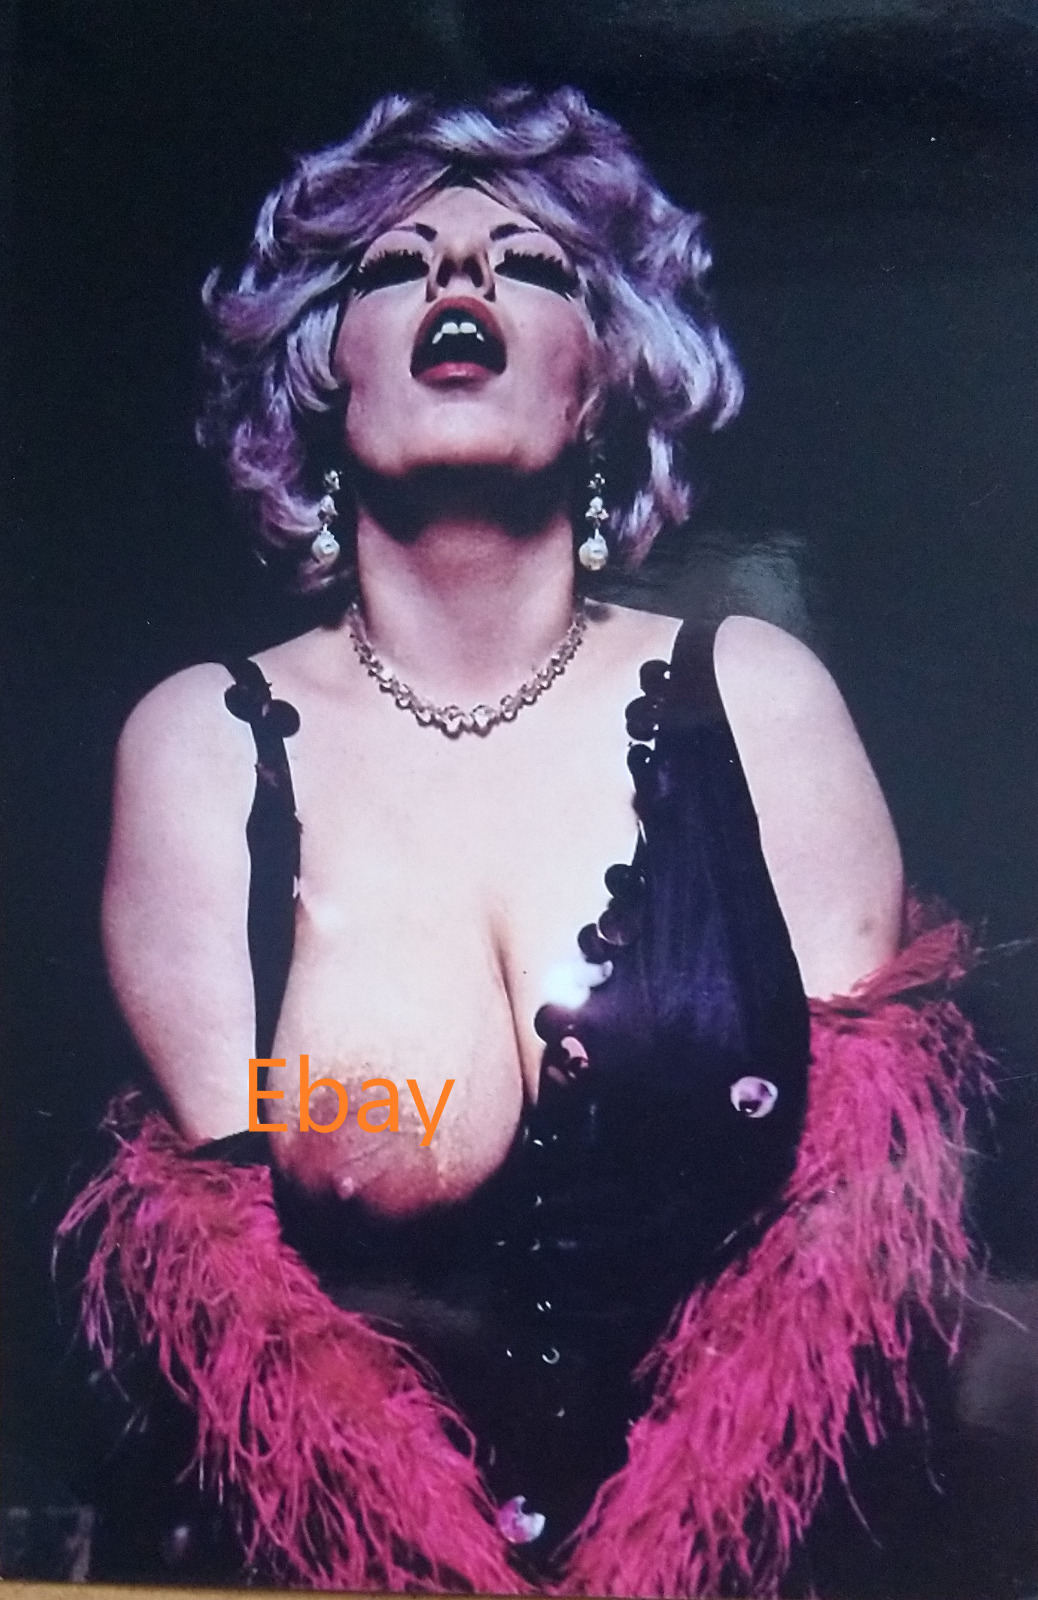 Half Topless Woman With Pink Feather Boa,  6 x 4 Inch Photograph